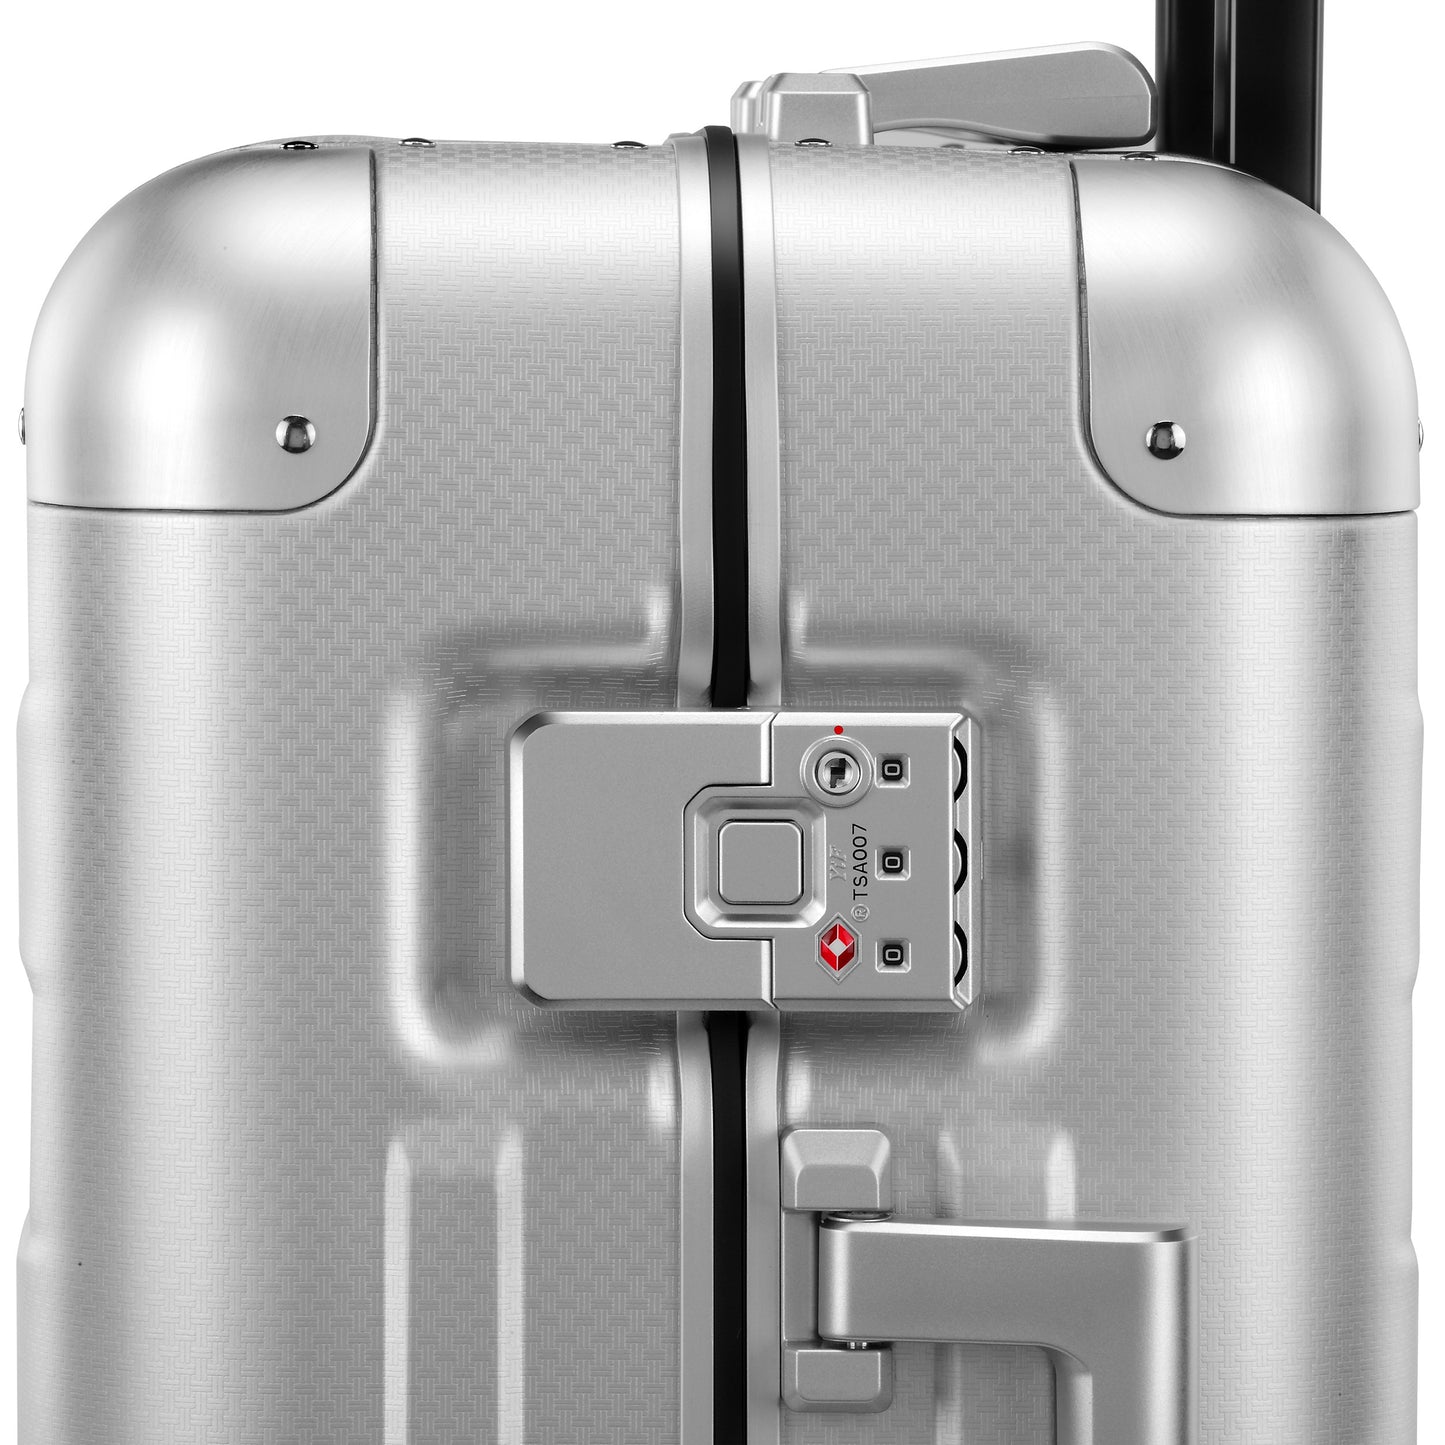 Aluminum Carry-on Suitcase by Gilbano 